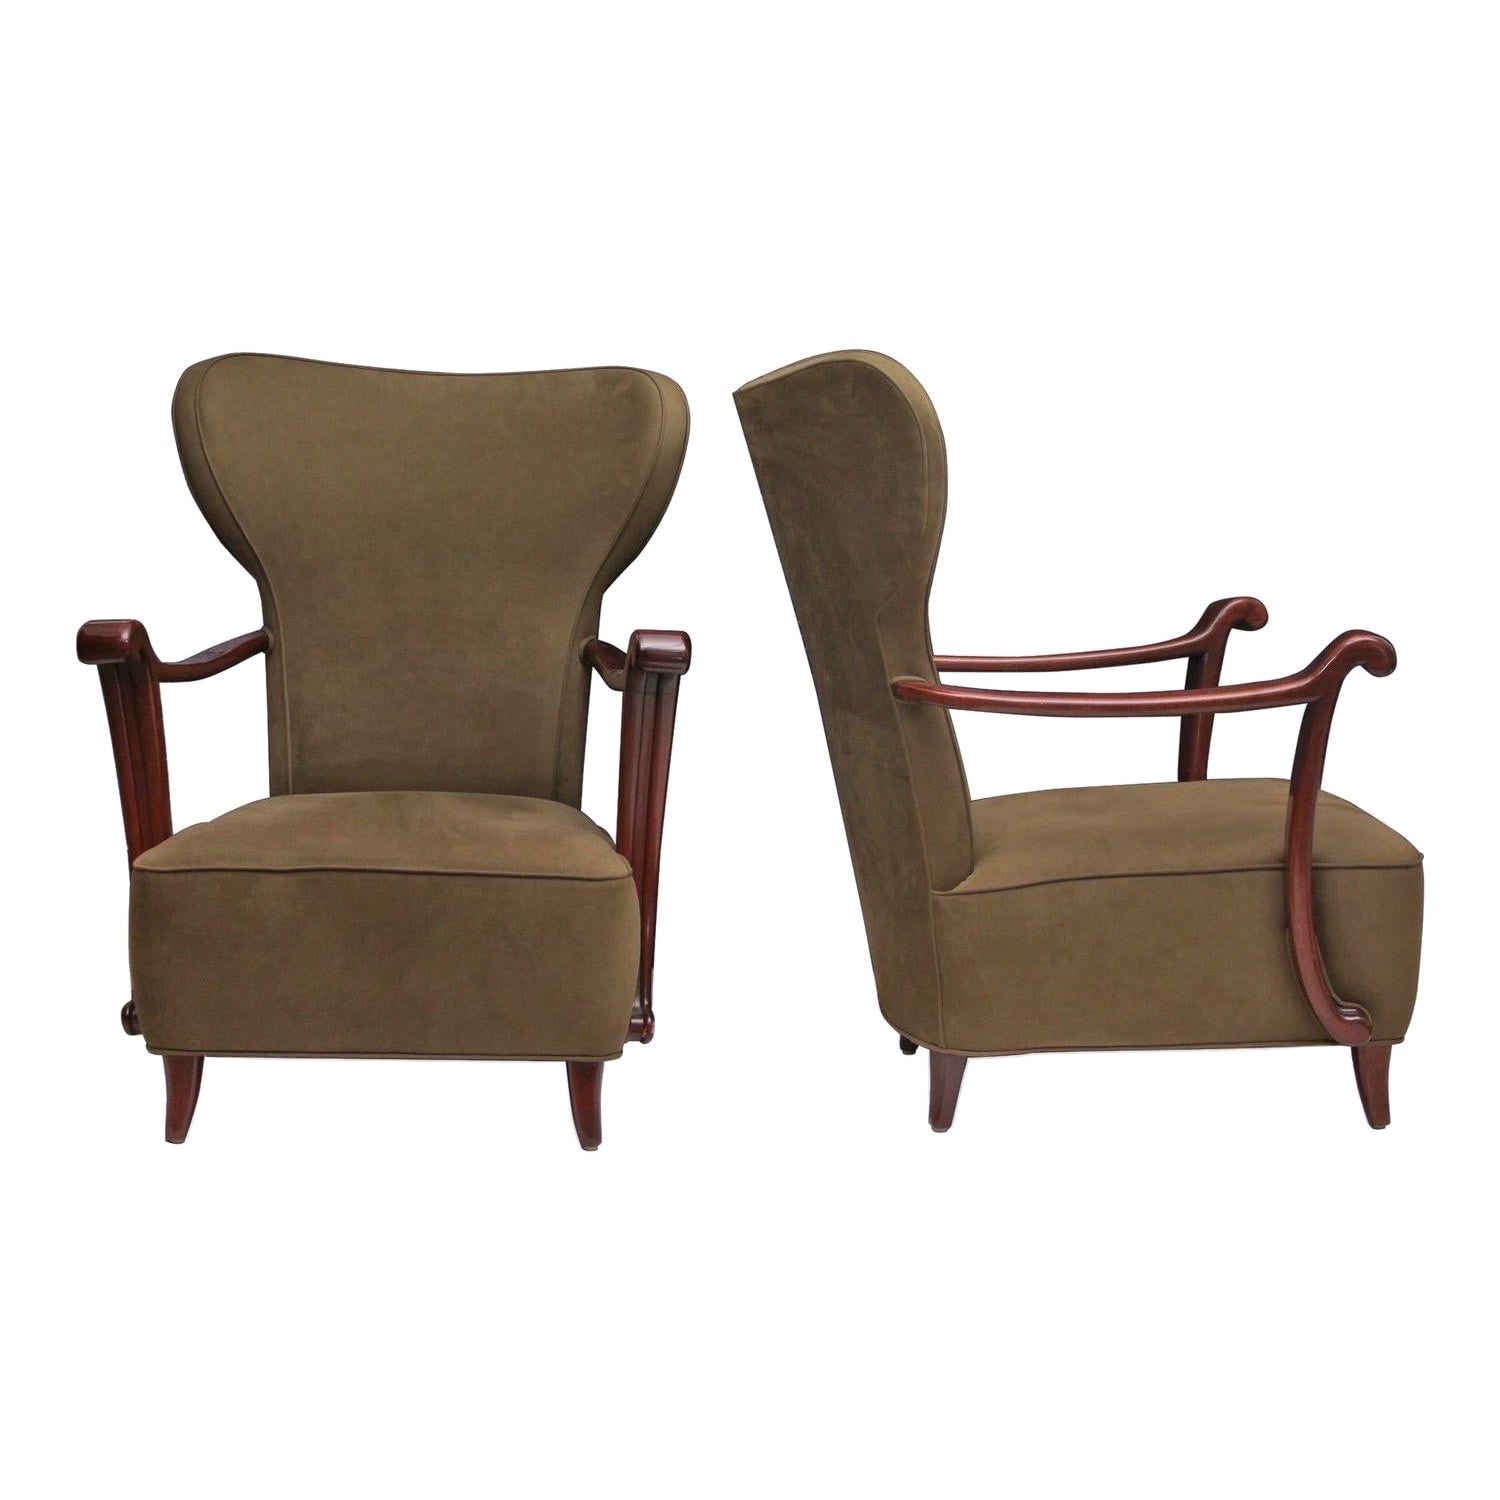 Vintage Italian Midcentury Wingback Chairs, a pair For Sale